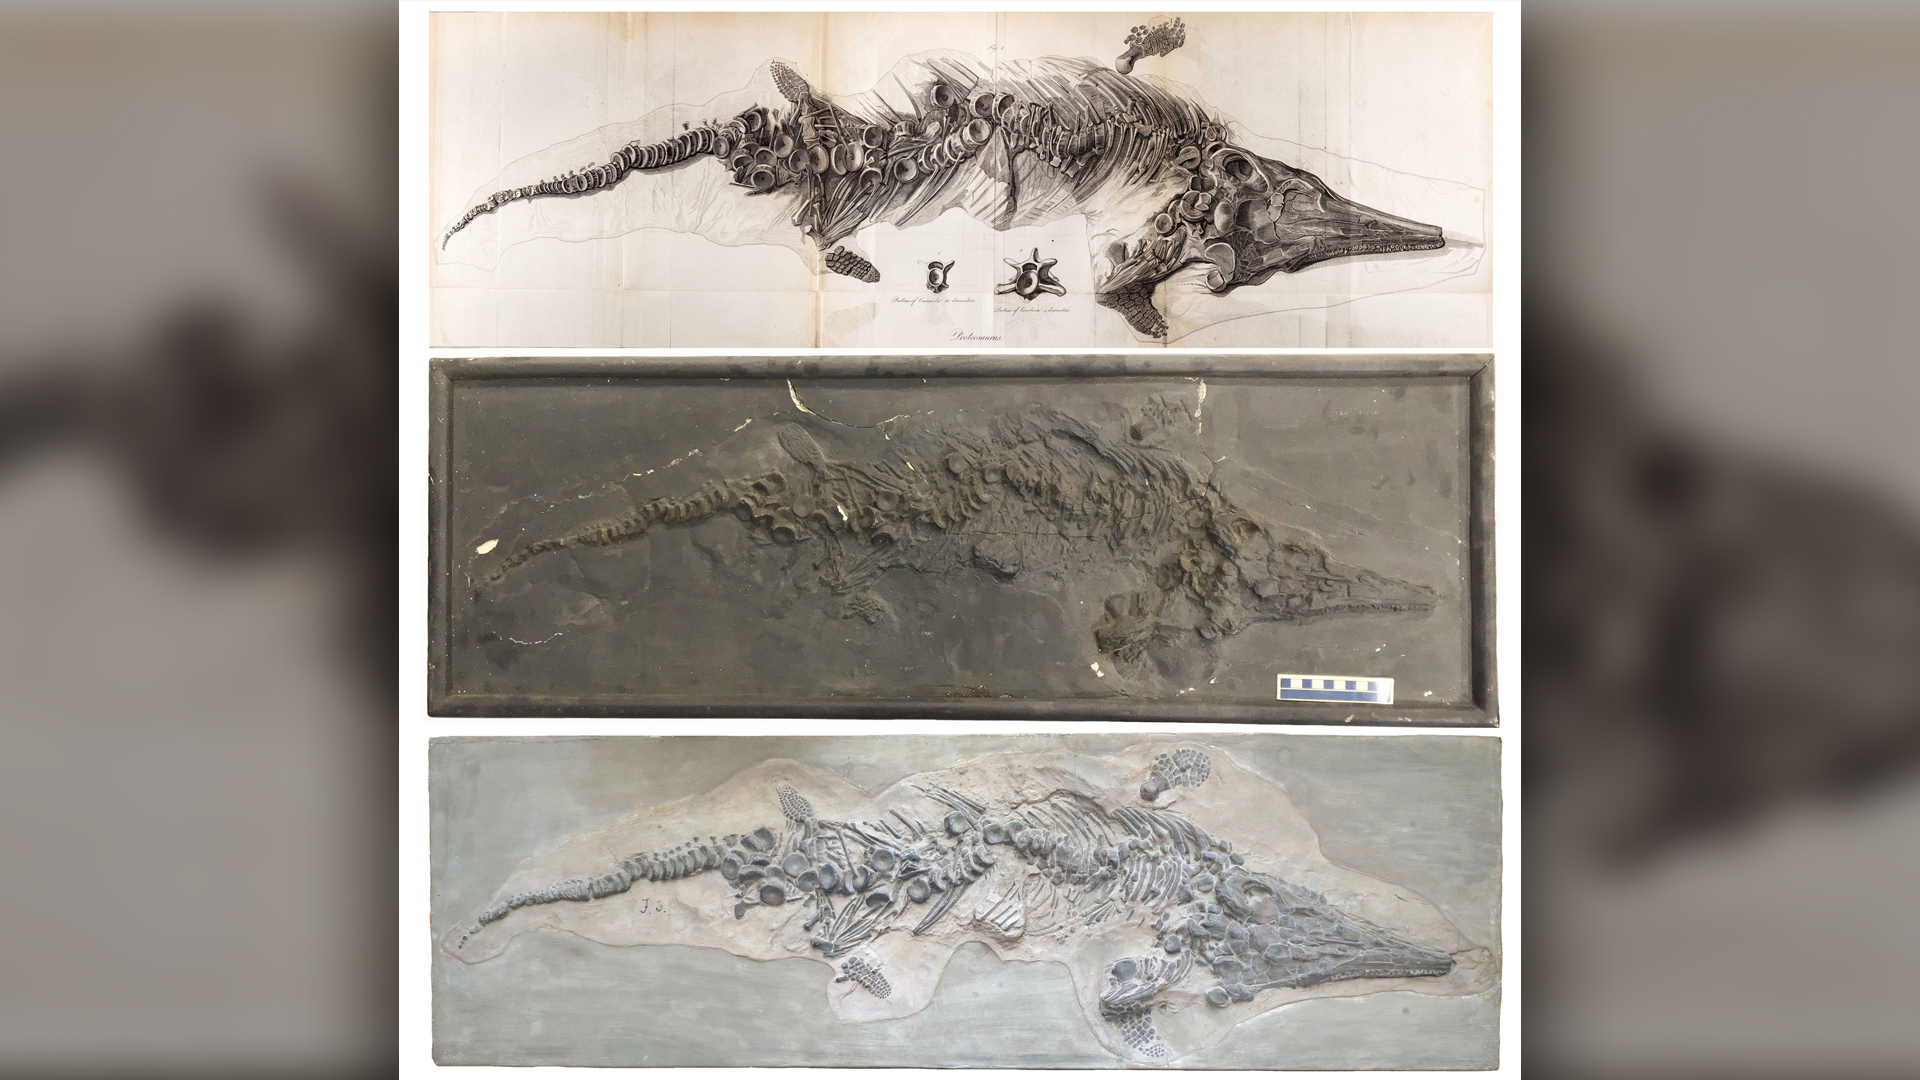 Top to bottom: The original illustration of the Lyme Regis ichthyosaur skeleton, the Yale cast and the more highly detailed Berlin cast.